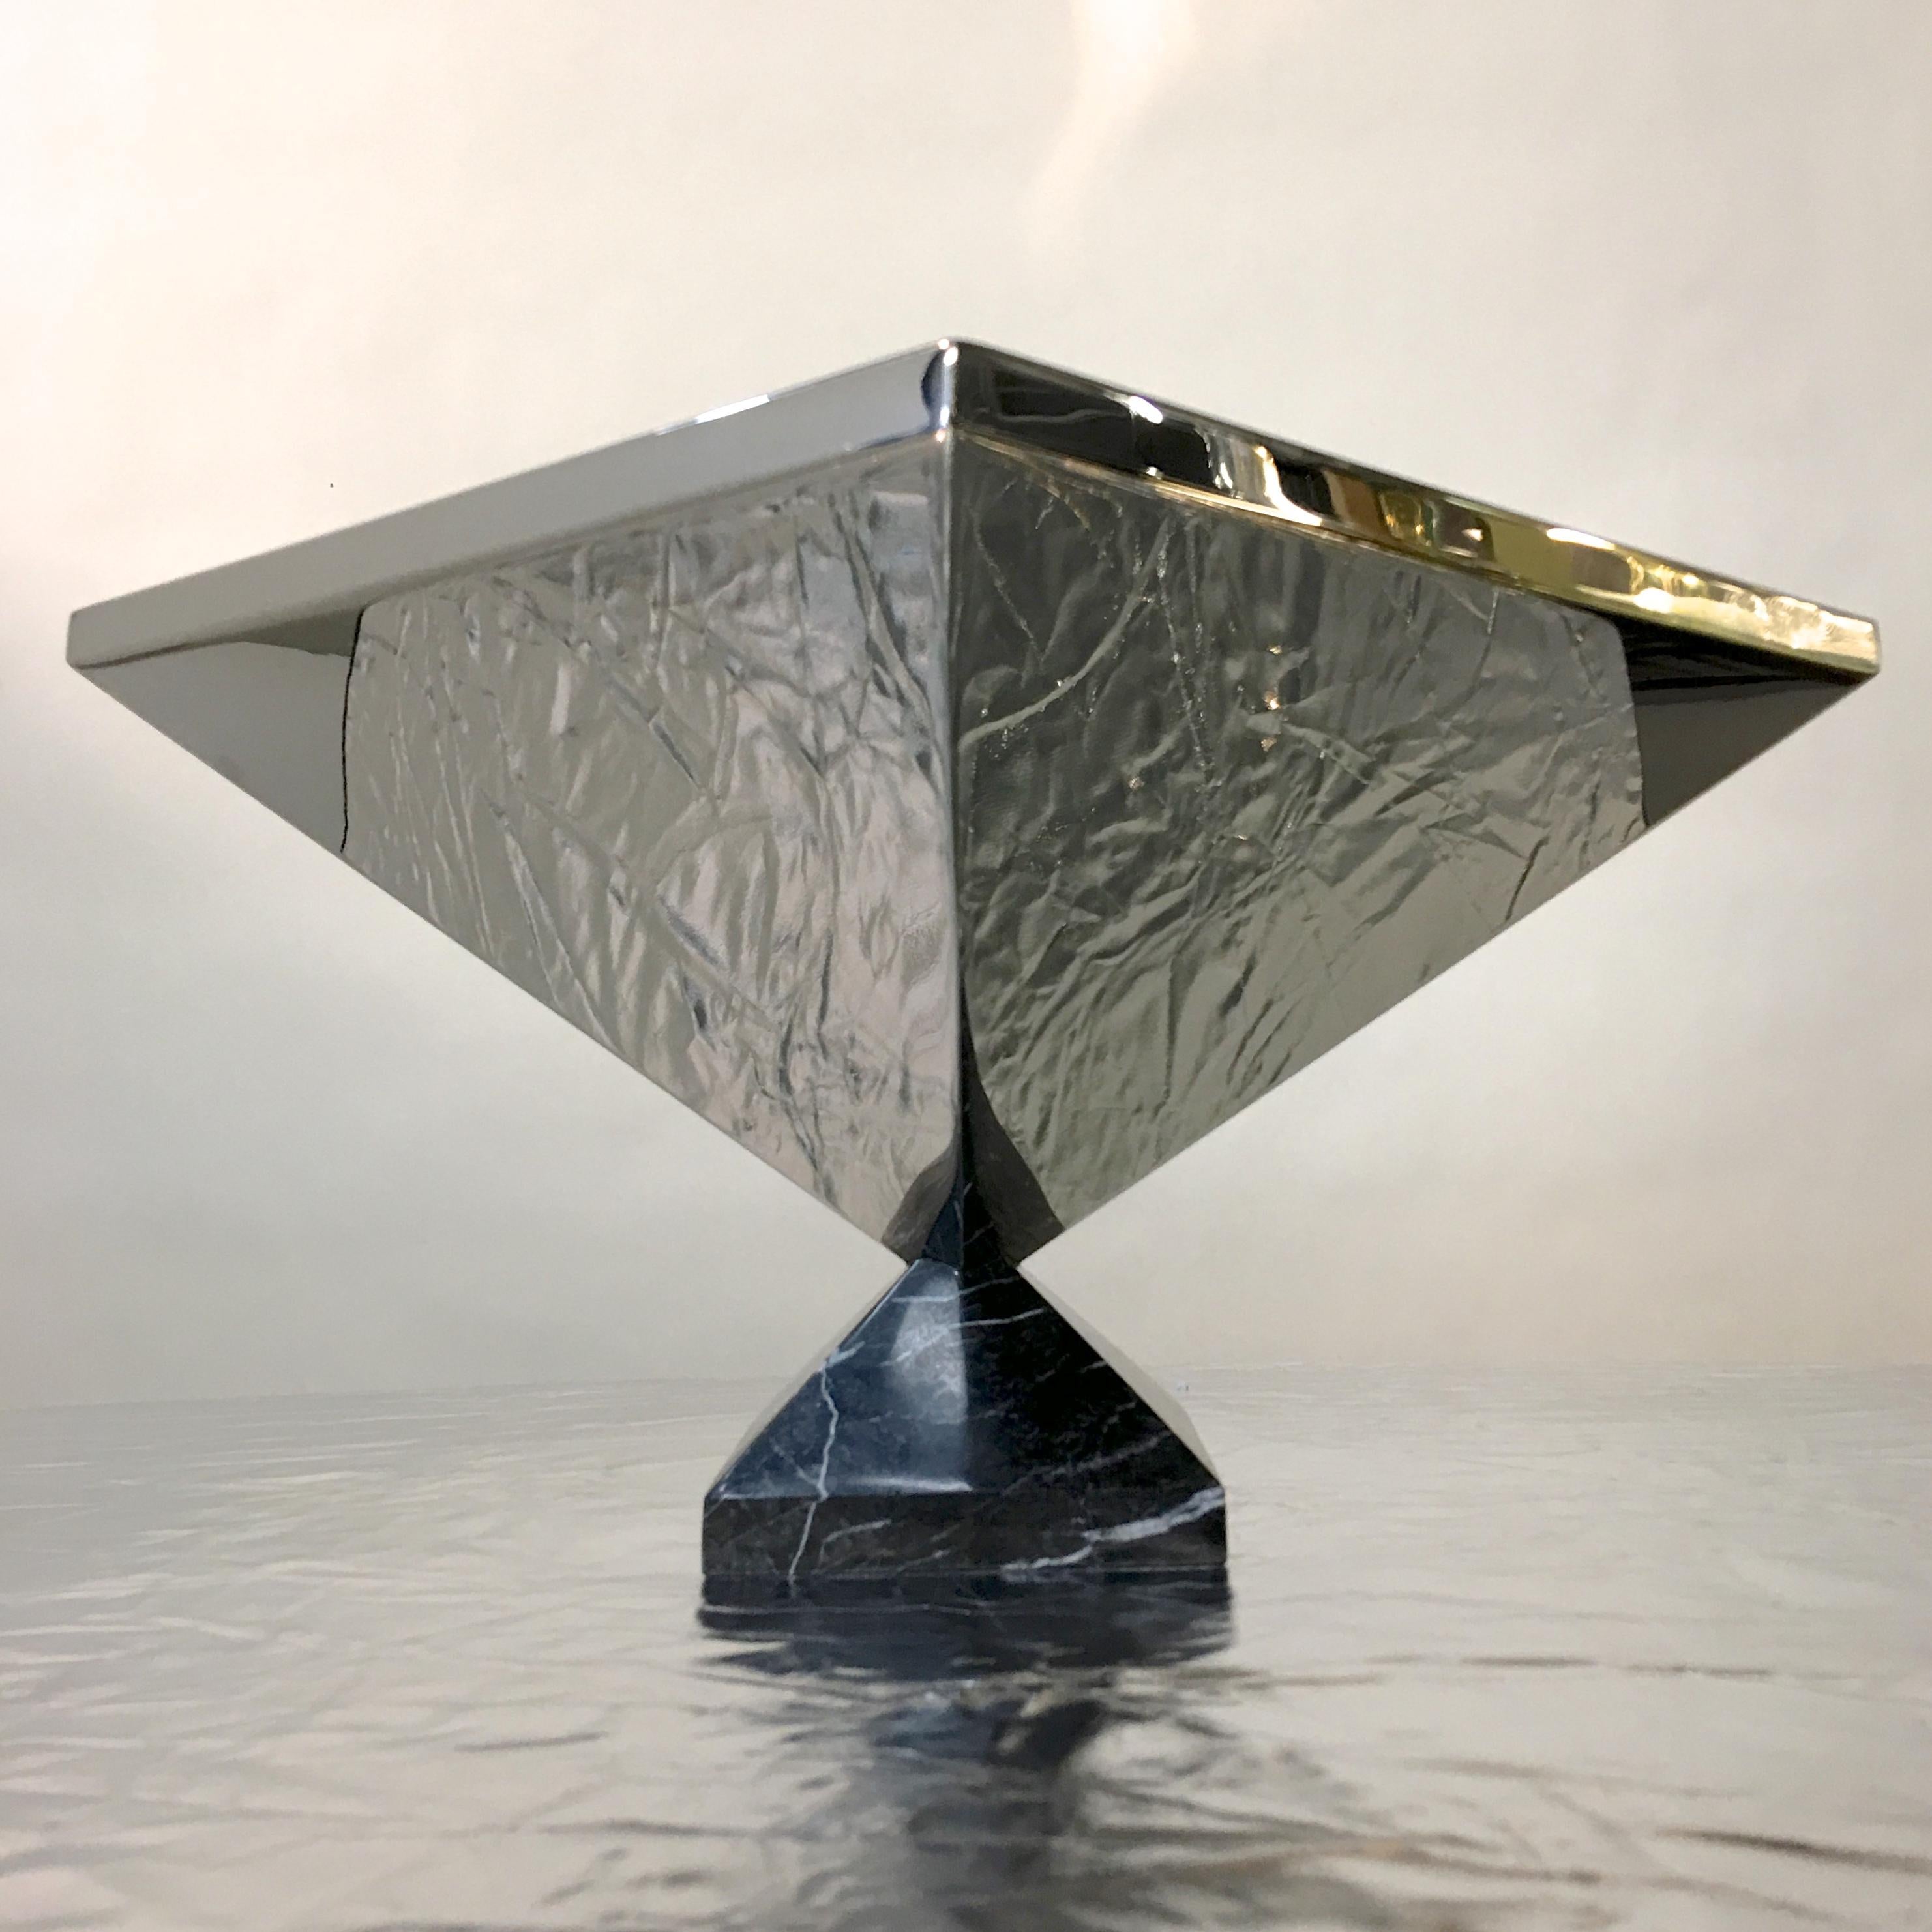 Inverted Pyramid Polished Stainless Centerpiece on Marble Pyramid Base 9